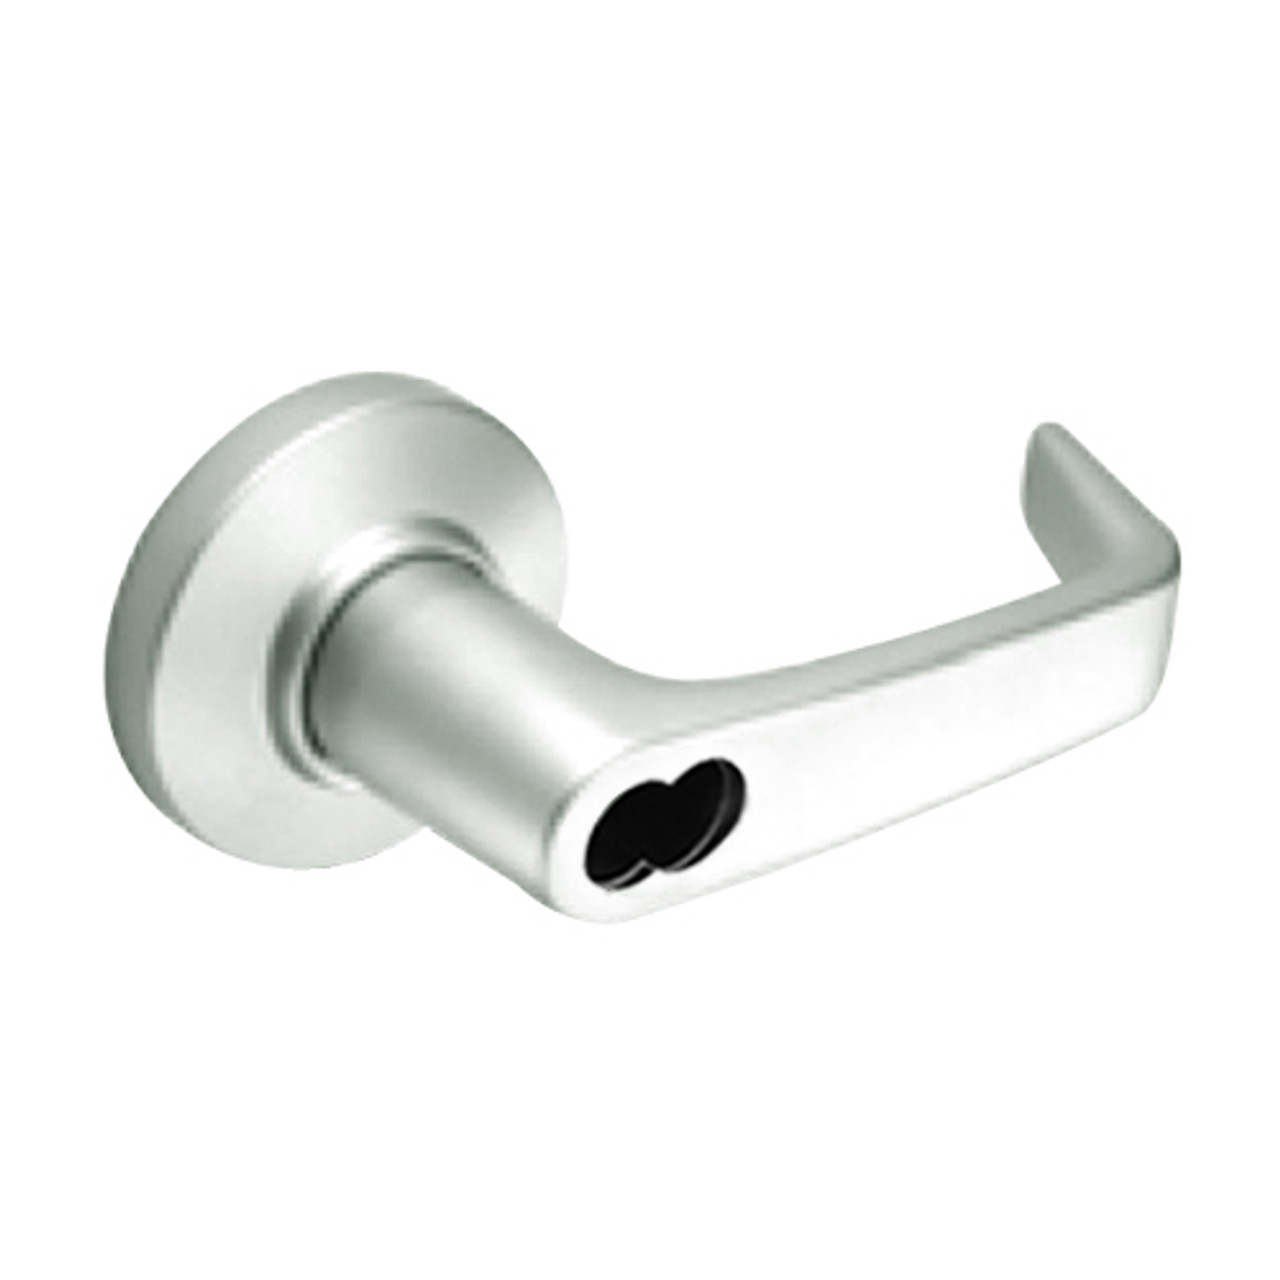 9K37A15CS3618 Best 9K Series Dormitory or Storeroom Cylindrical Lever Locks with Contour Angle with Return Lever Design Accept 7 Pin Best Core in Bright Nickel